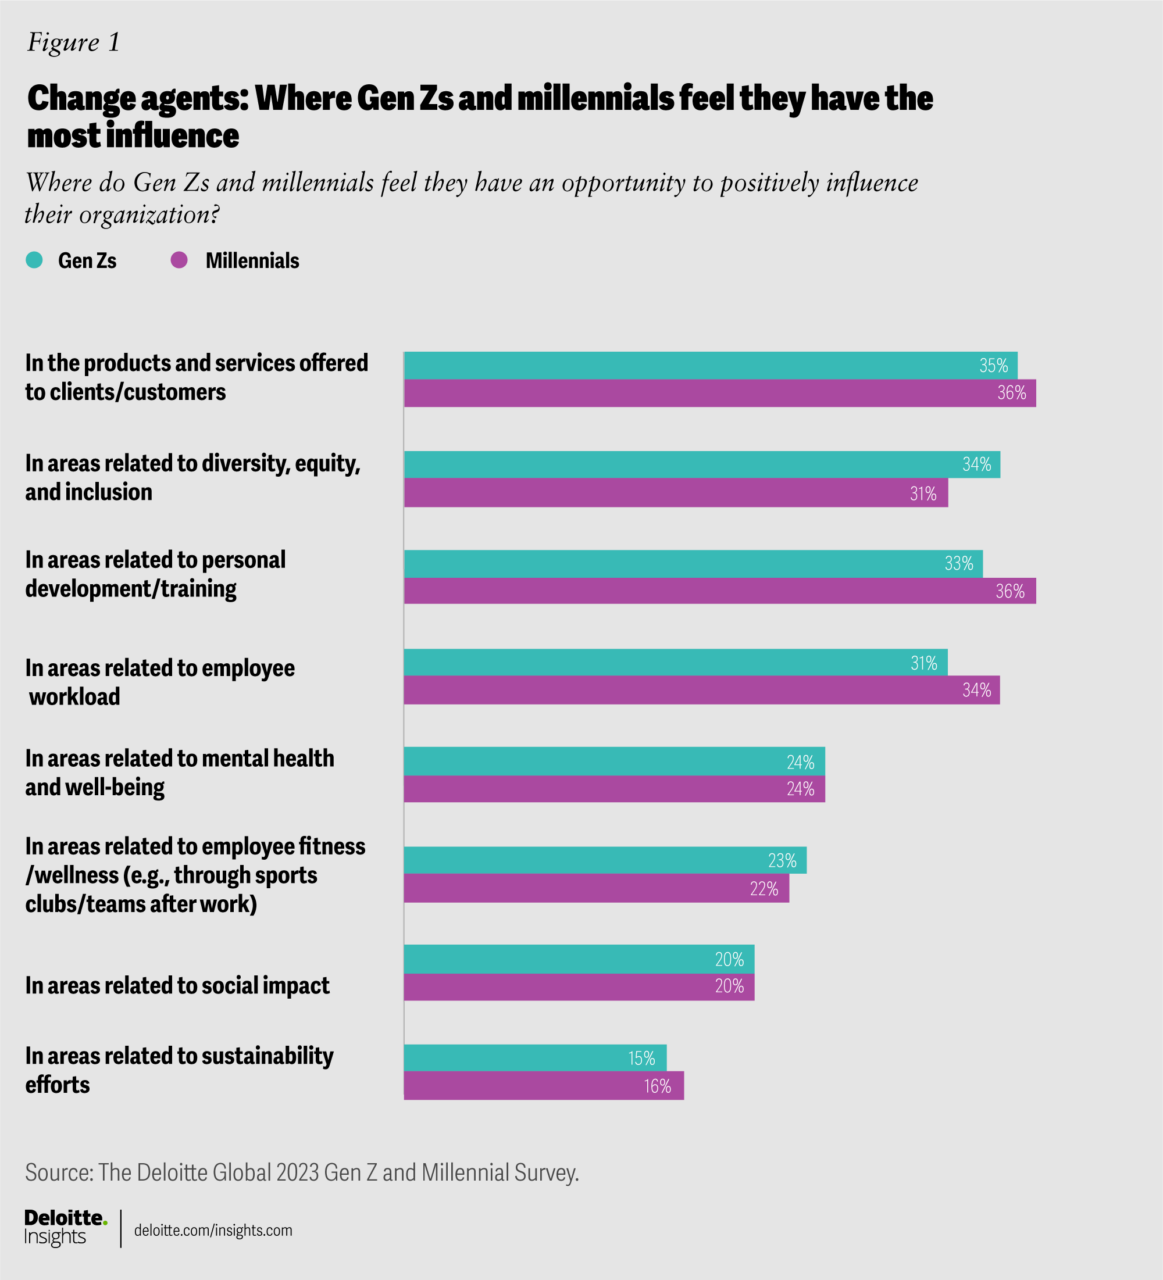 Change agents: Where Gen Z and millennials feel they have the most influence.